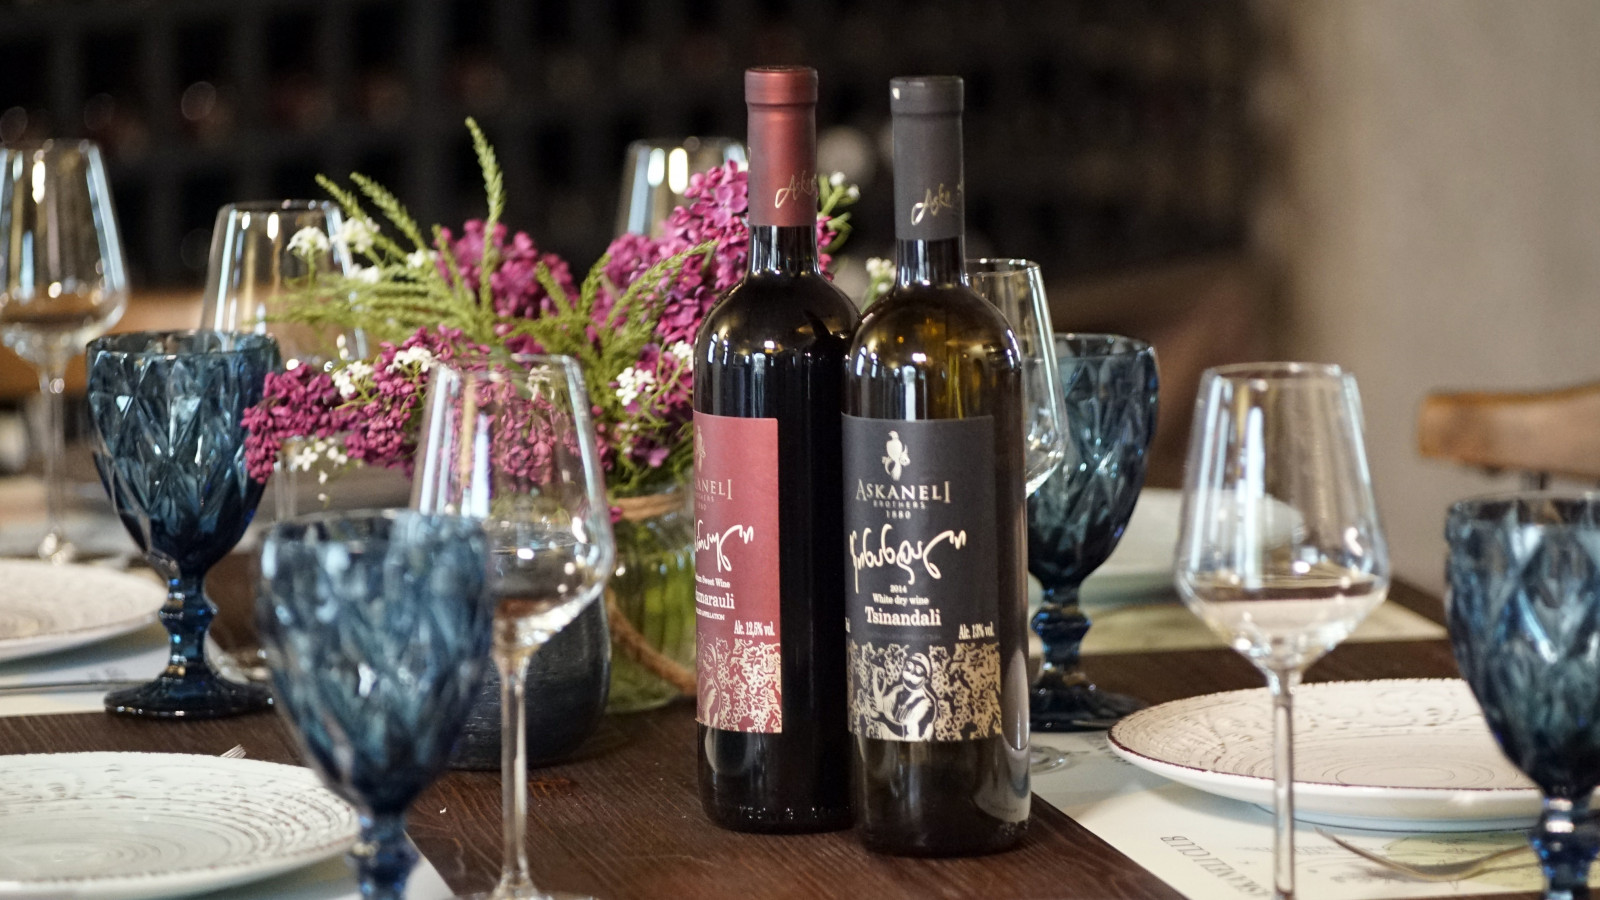 Askaneli Brothers, red & white wines